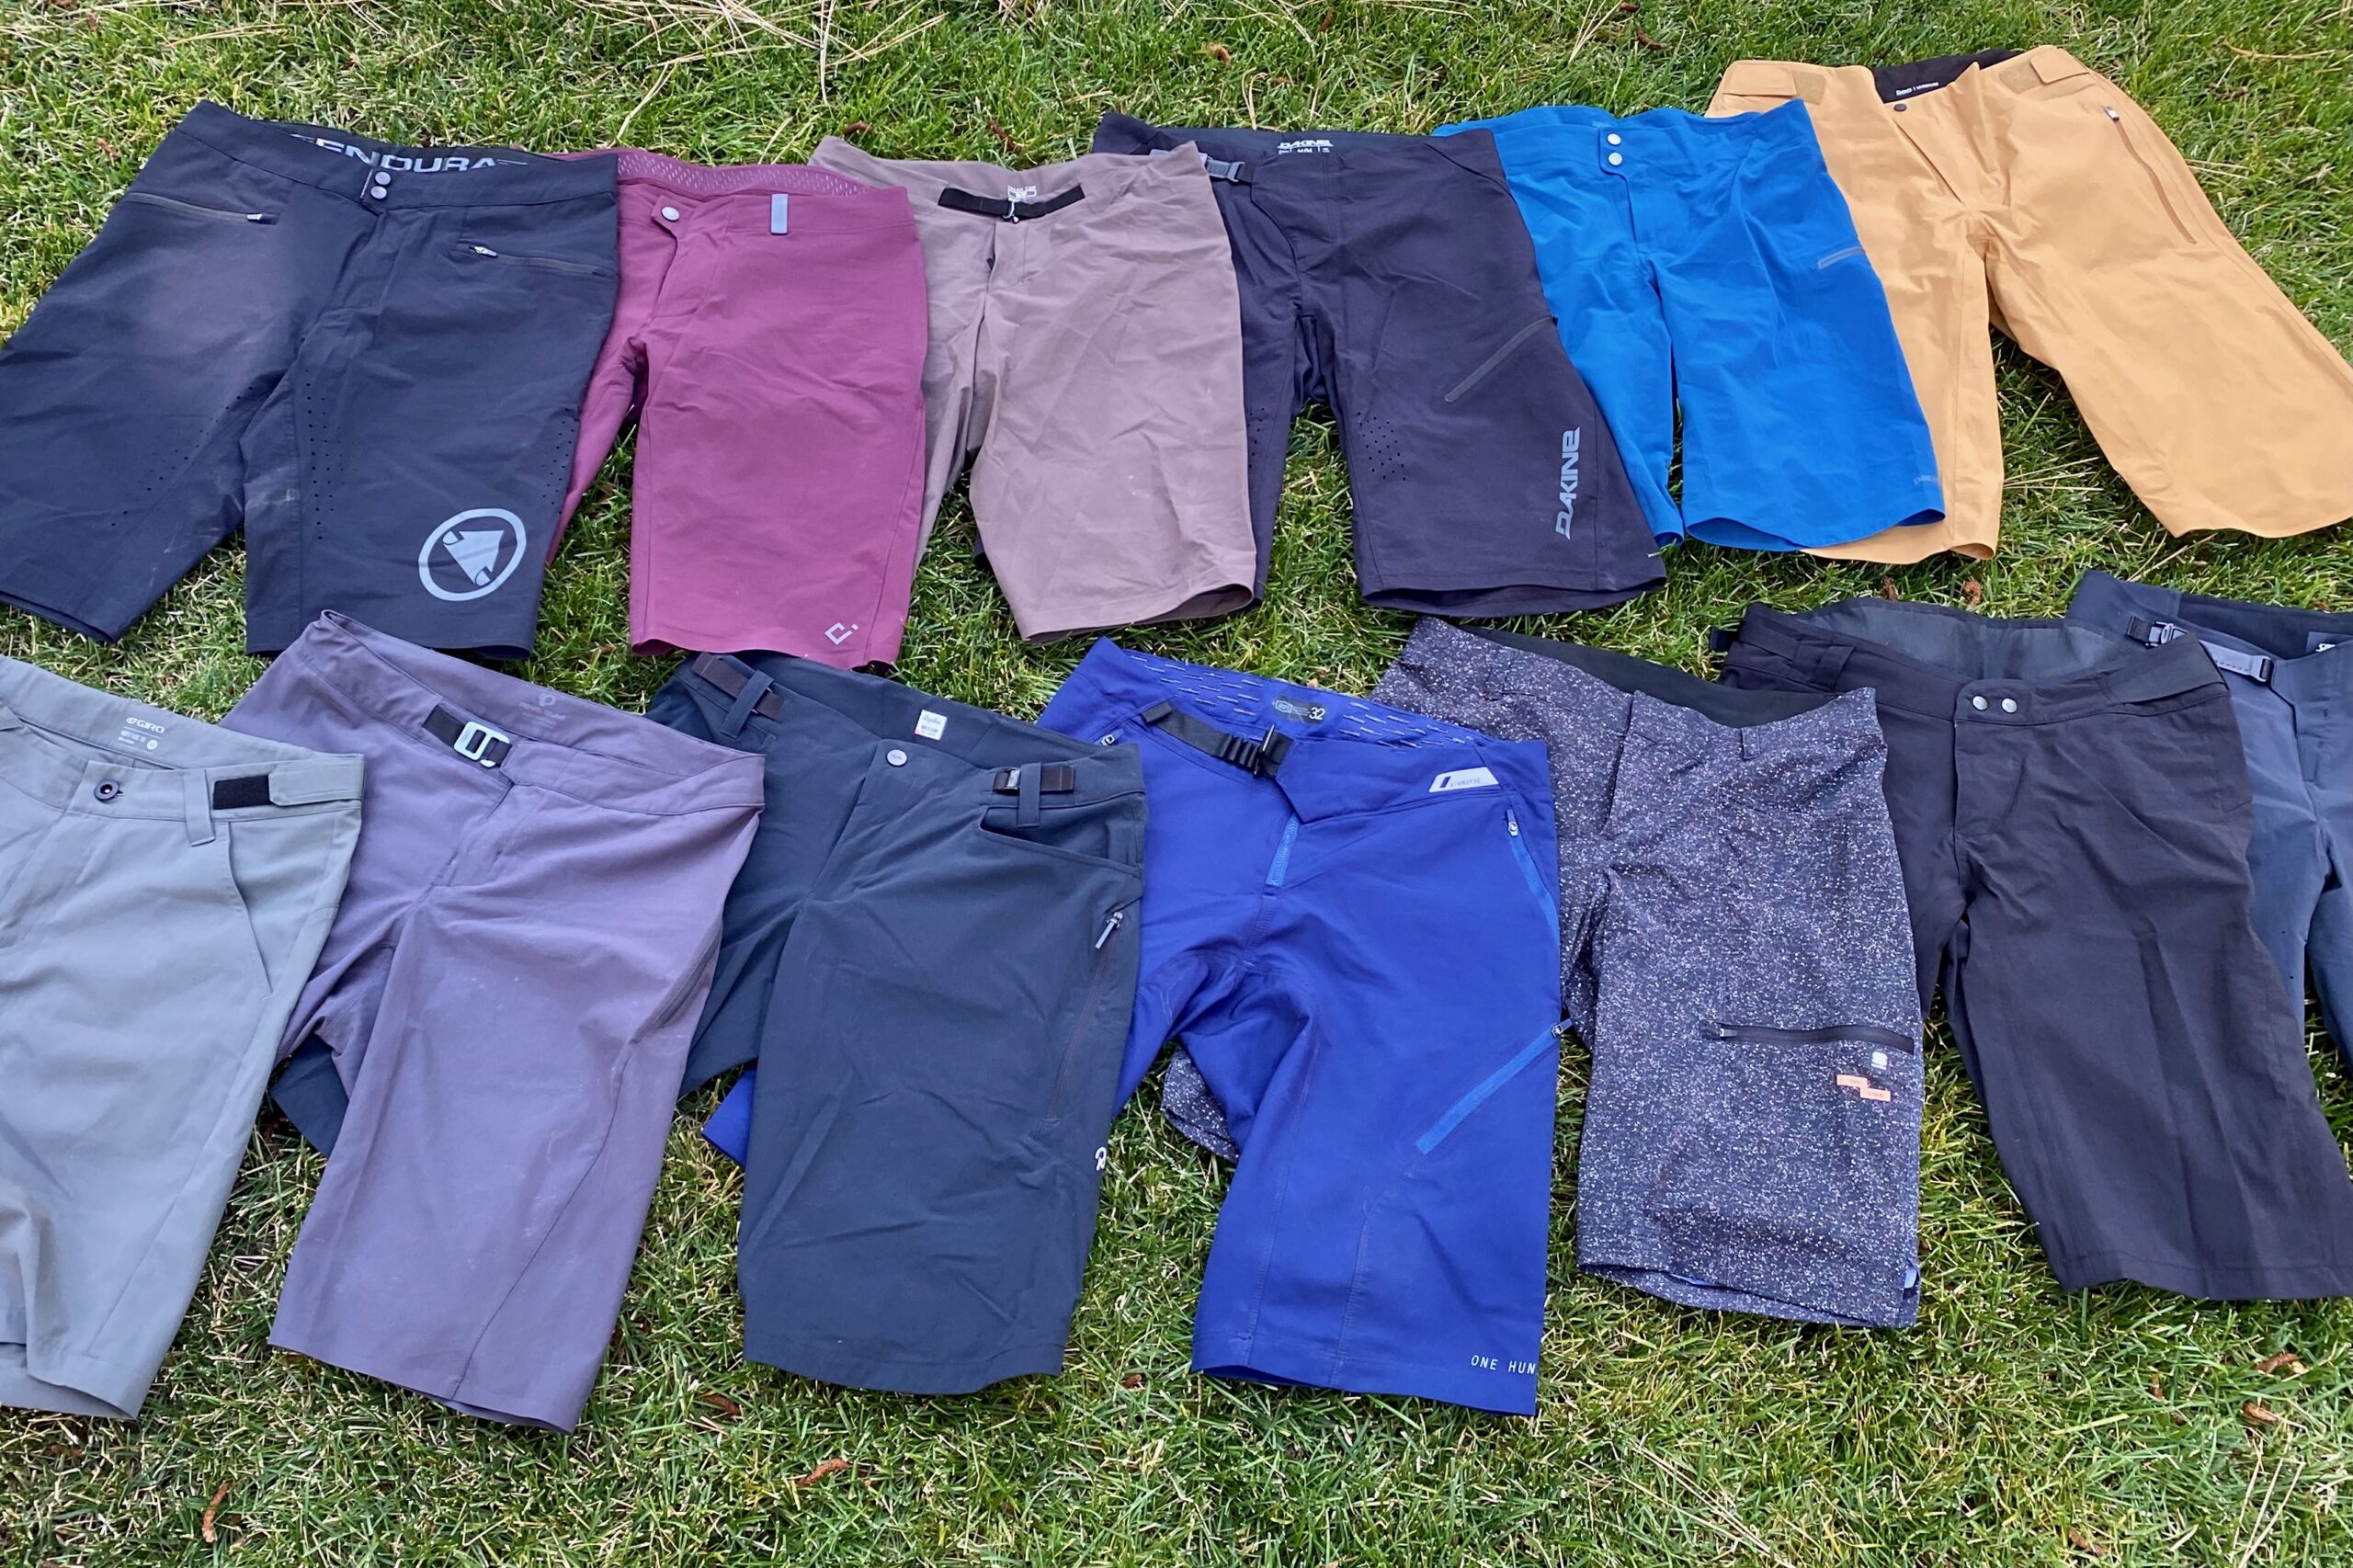 ONE ORIGINAL GEAR (SUN RISE WEAR) Men's Recycled Athletic Shorts